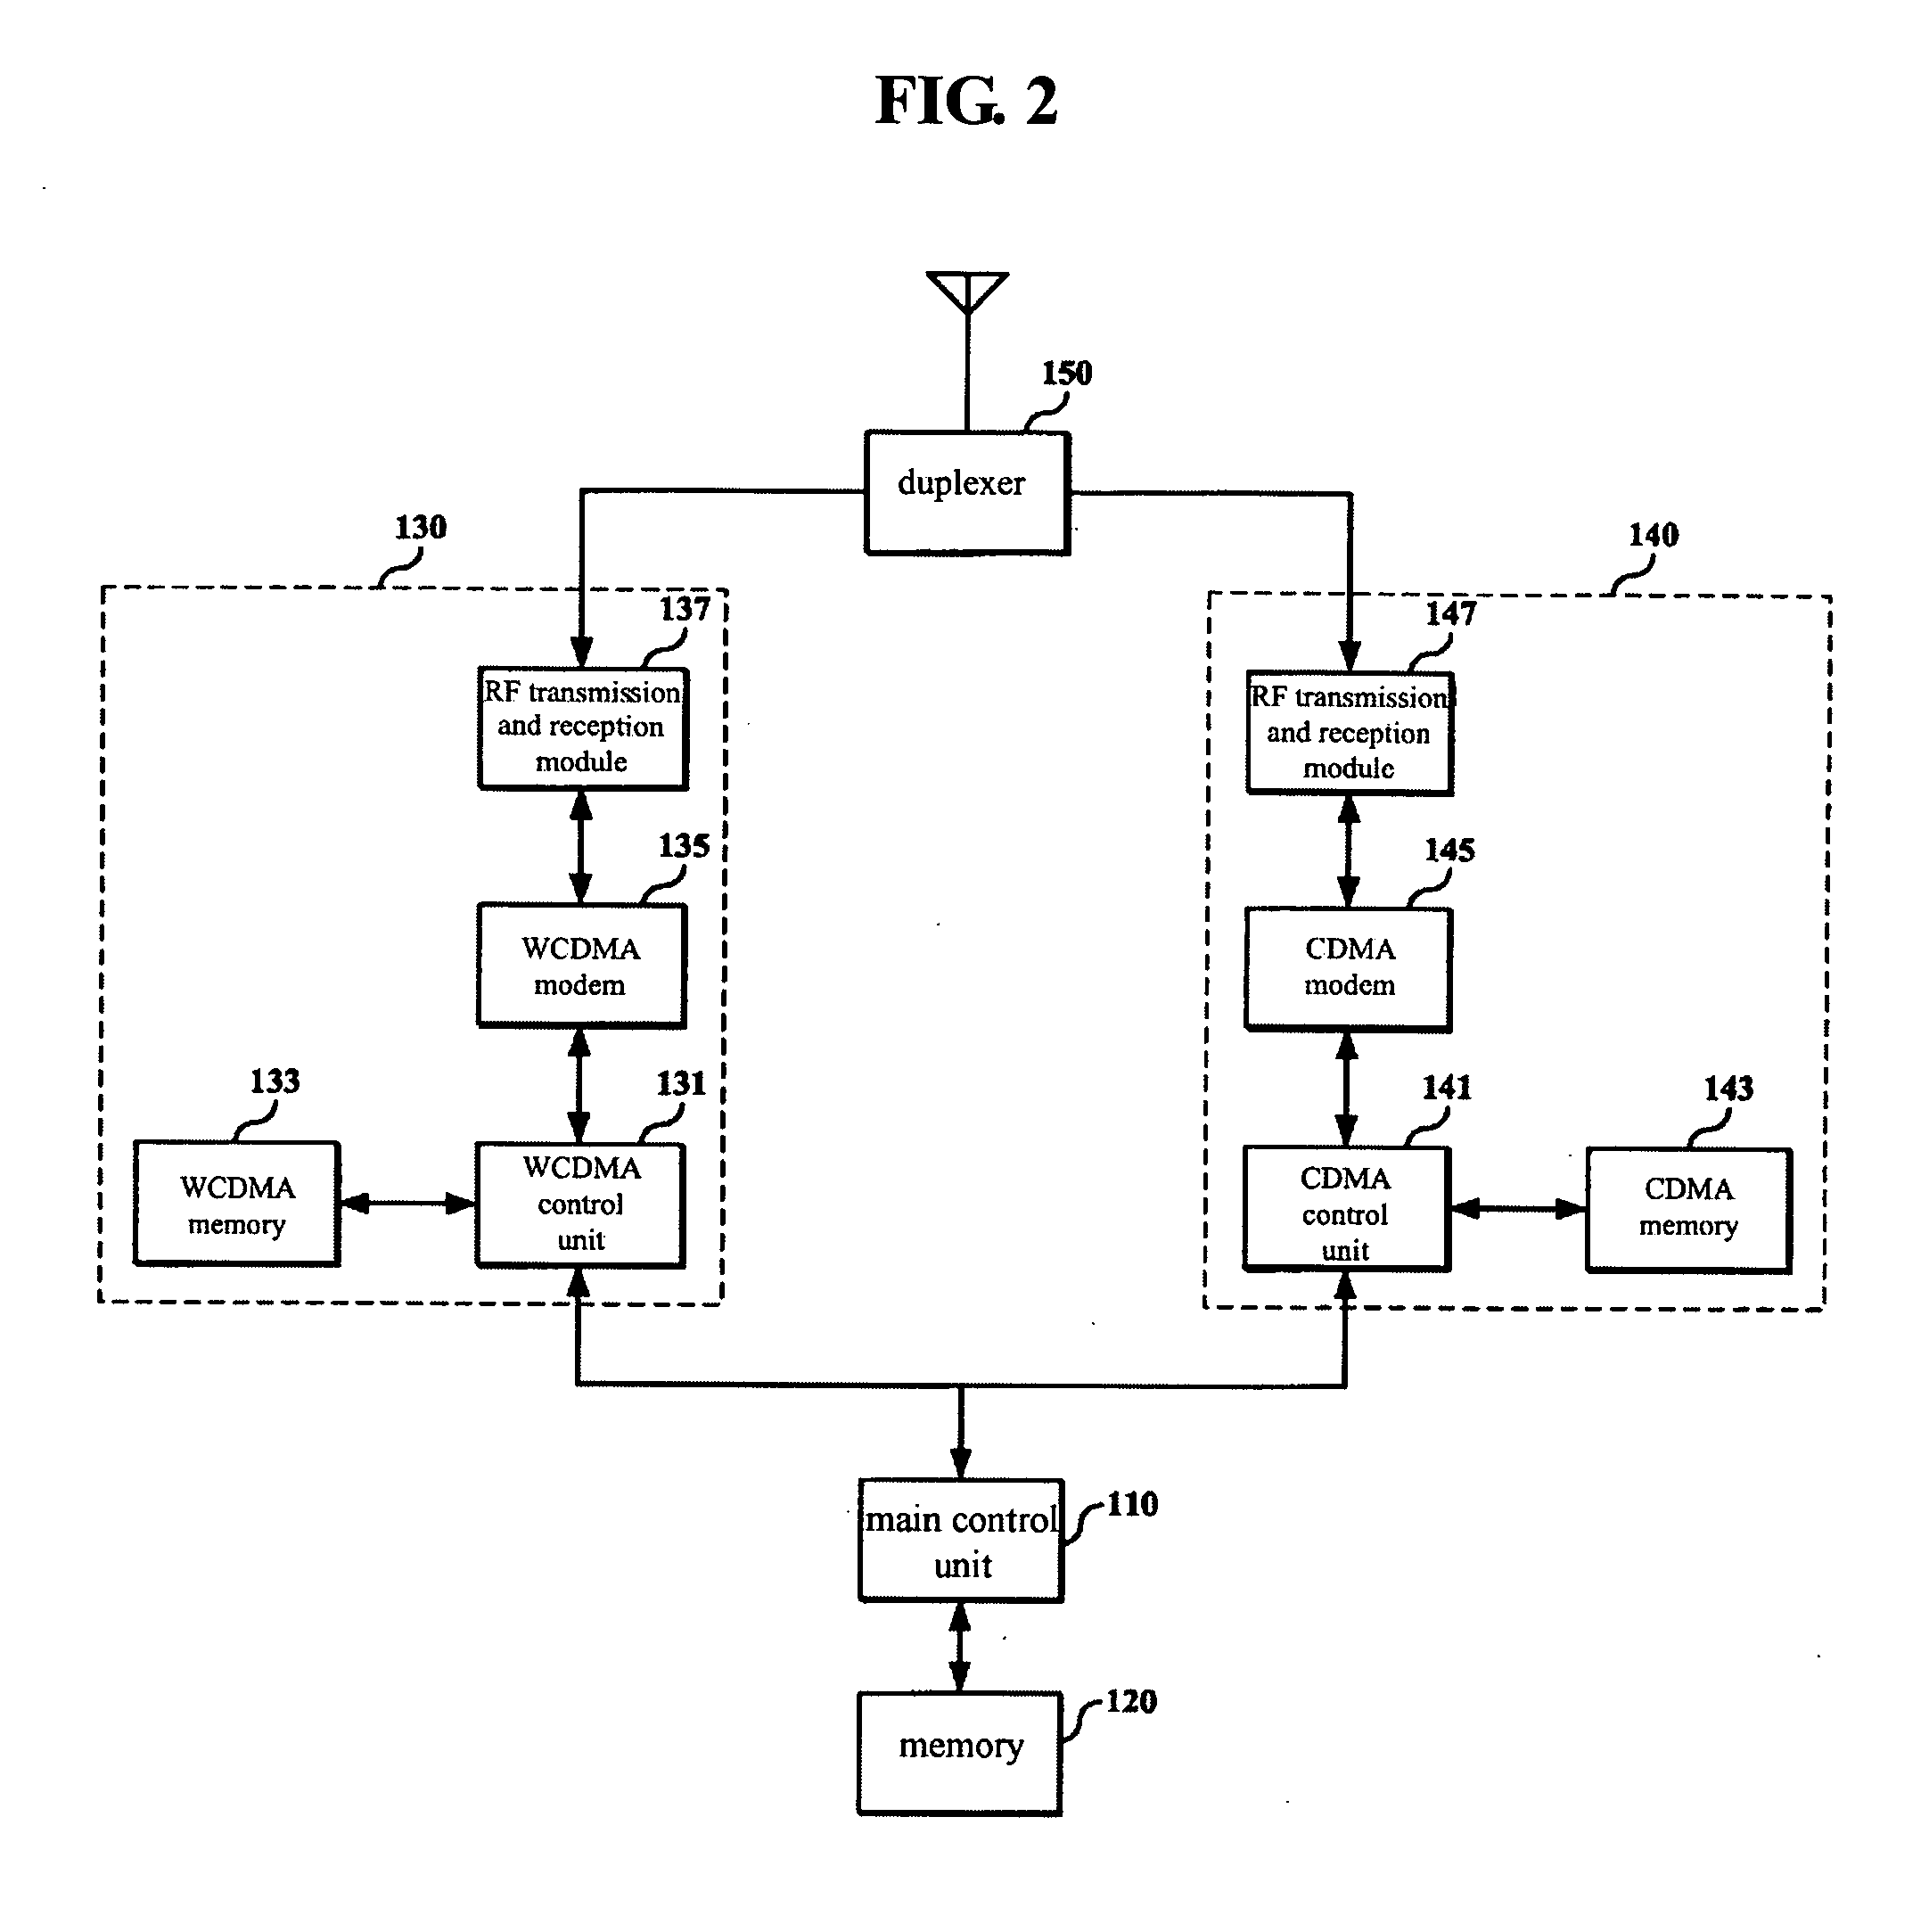 Method for mode switching between systems in multi-mode mobile terminal